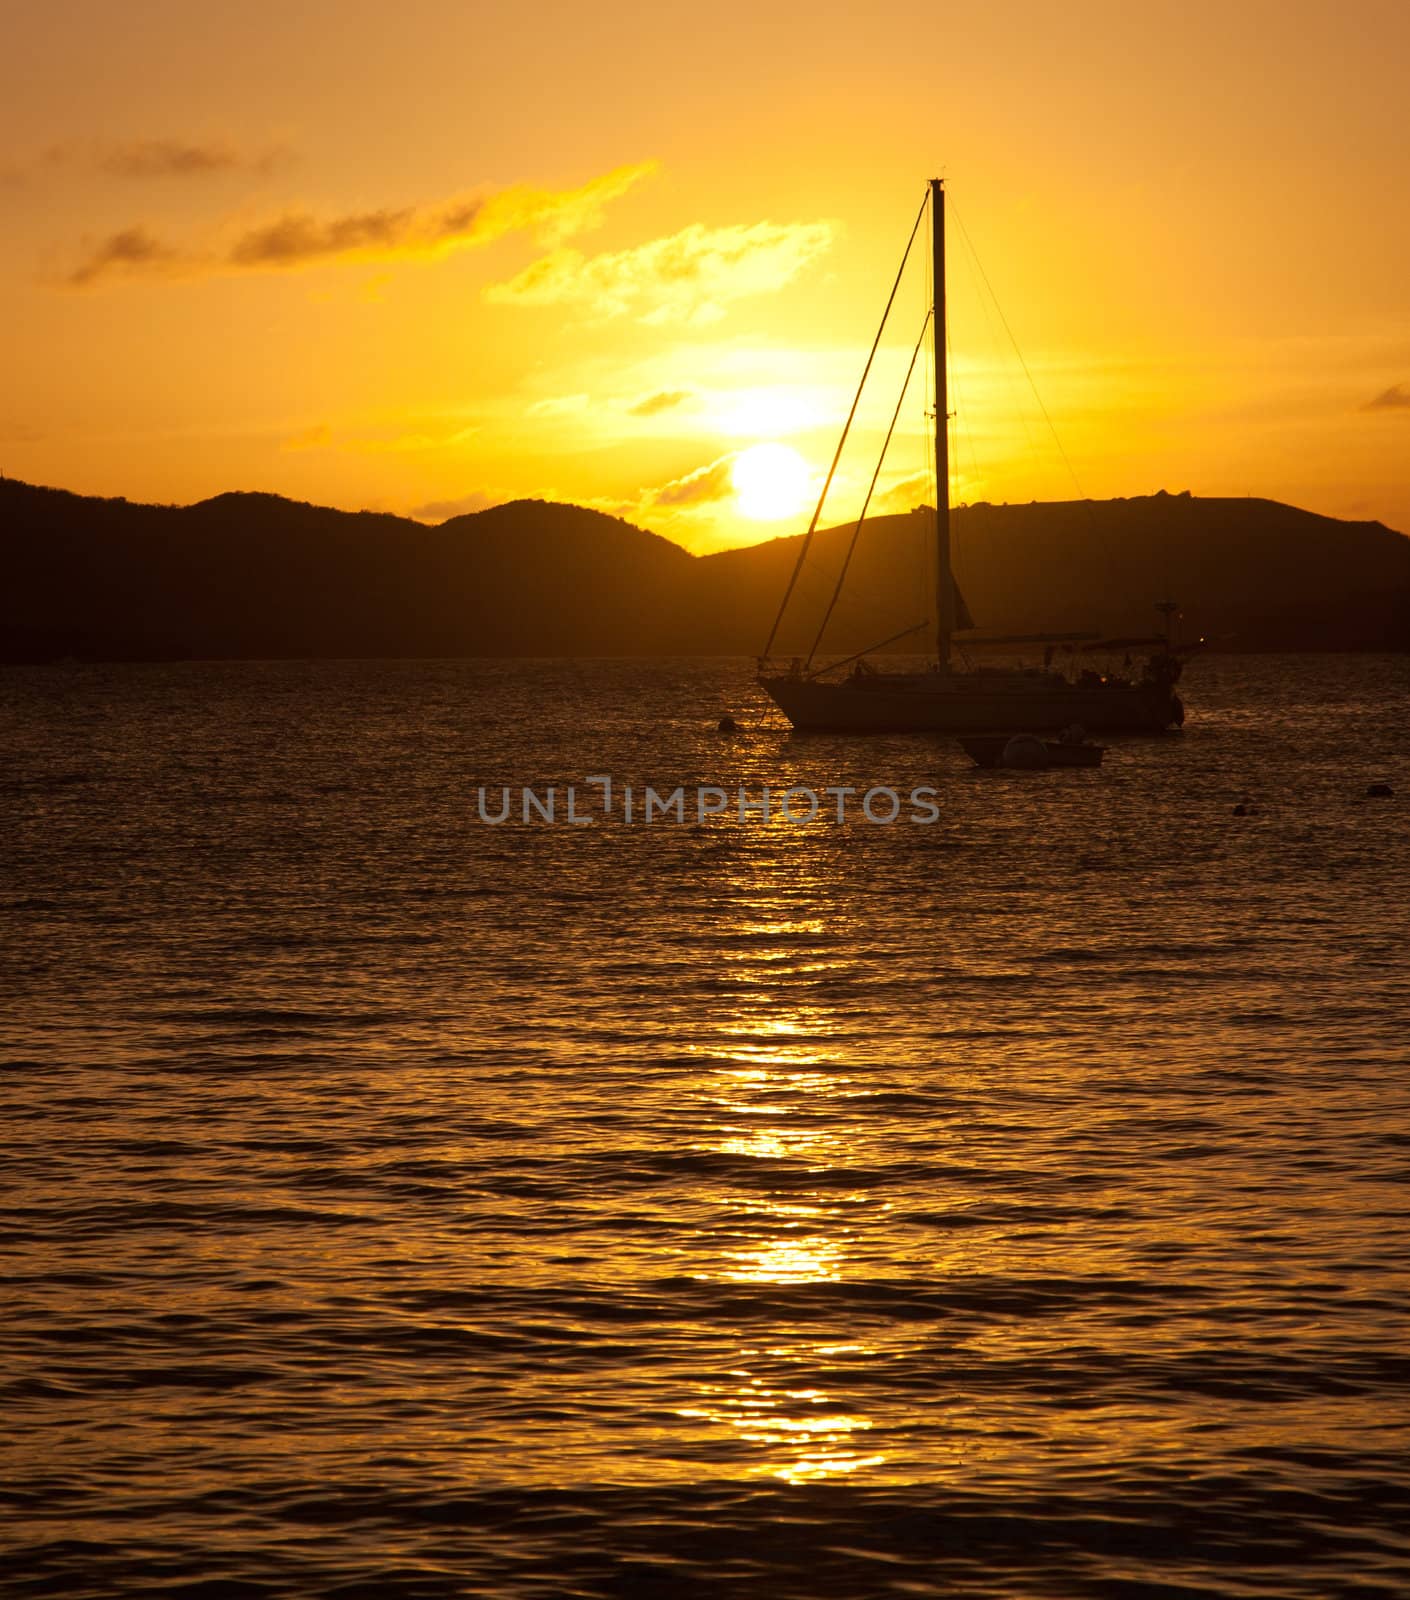 Silhouette of a sailing boat in front of the setting sun over the ocean